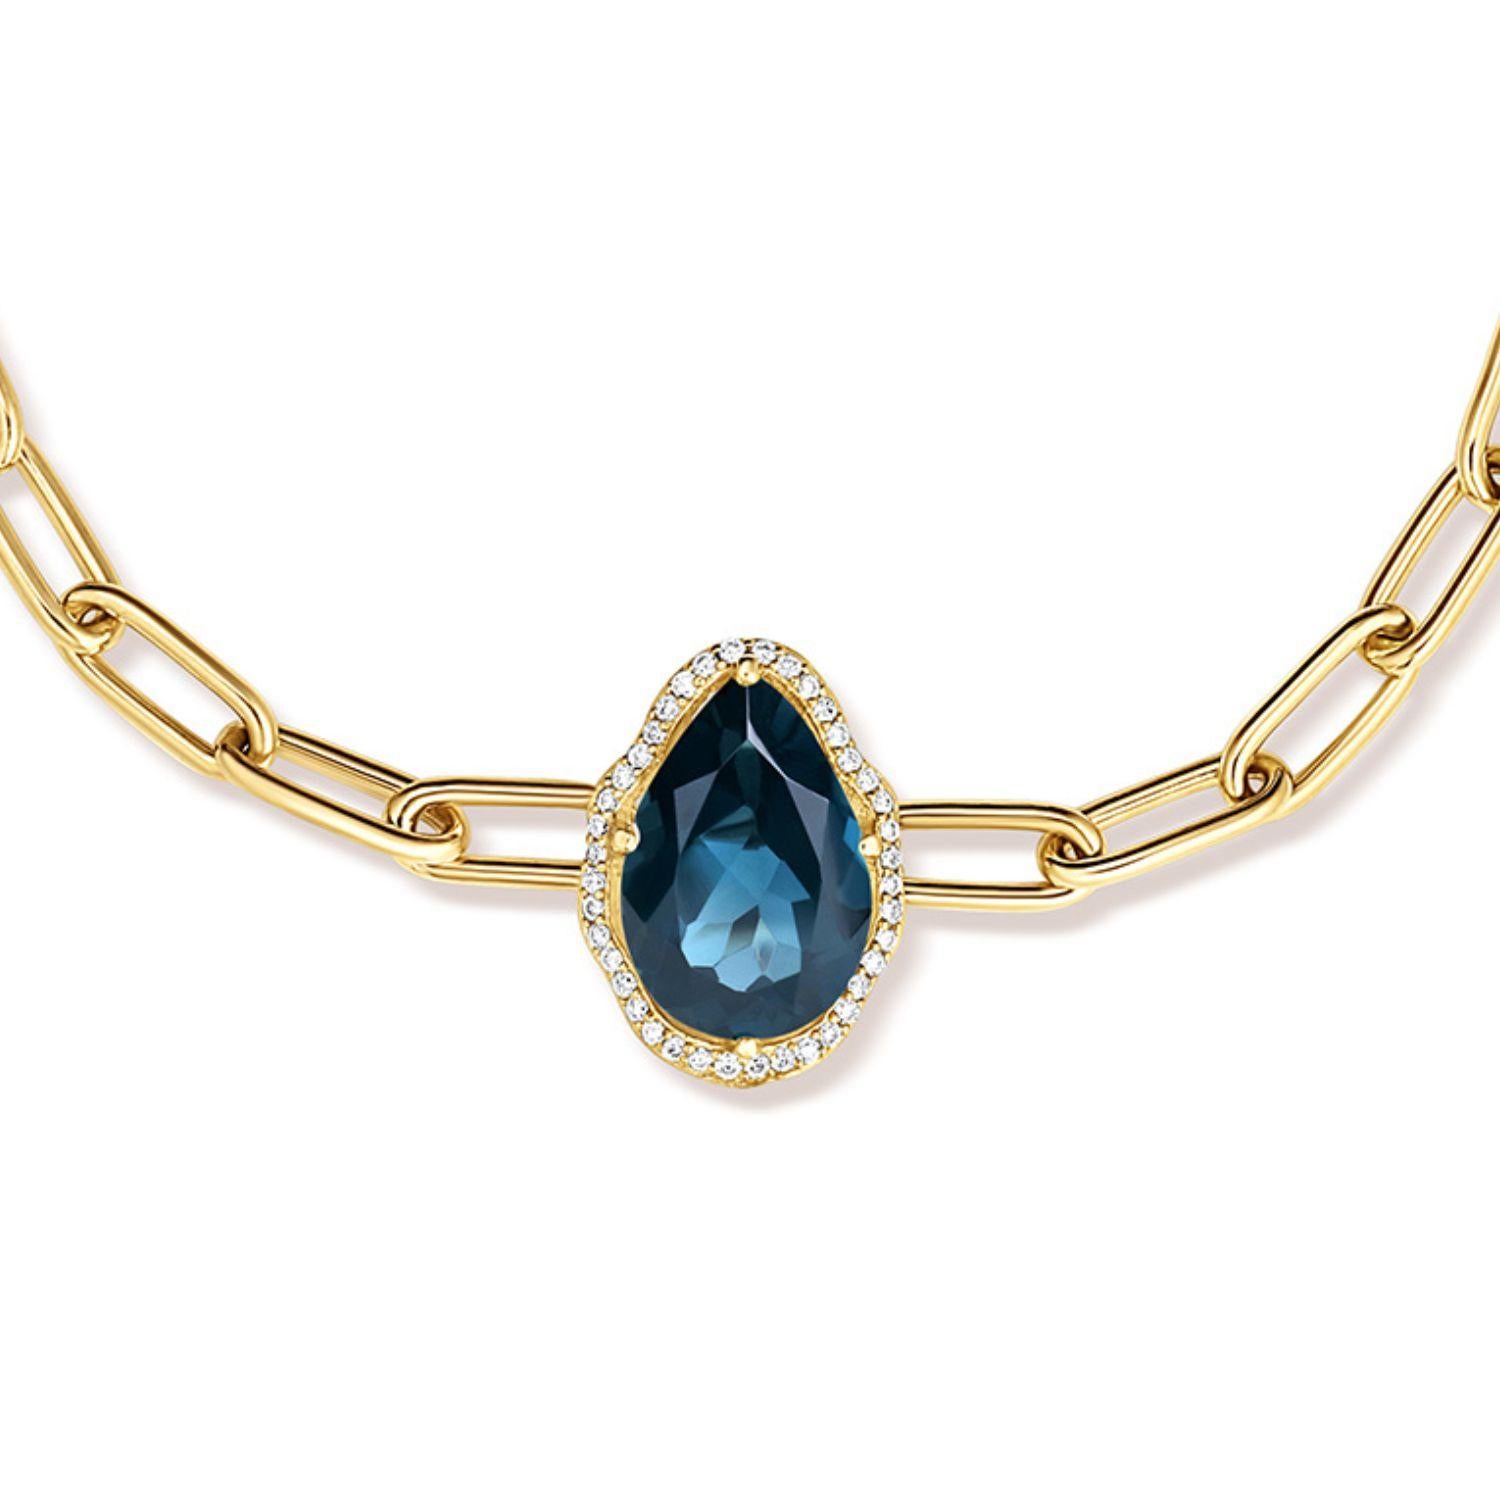 Glow Bracelet. 18K yellow gold (750/1000), with a 2.96 carat pear-cut London blue topaz and 0.1 carats of round brilliant-cut diamonds. 18K yellow gold chain with adjustable length of 17 cm.